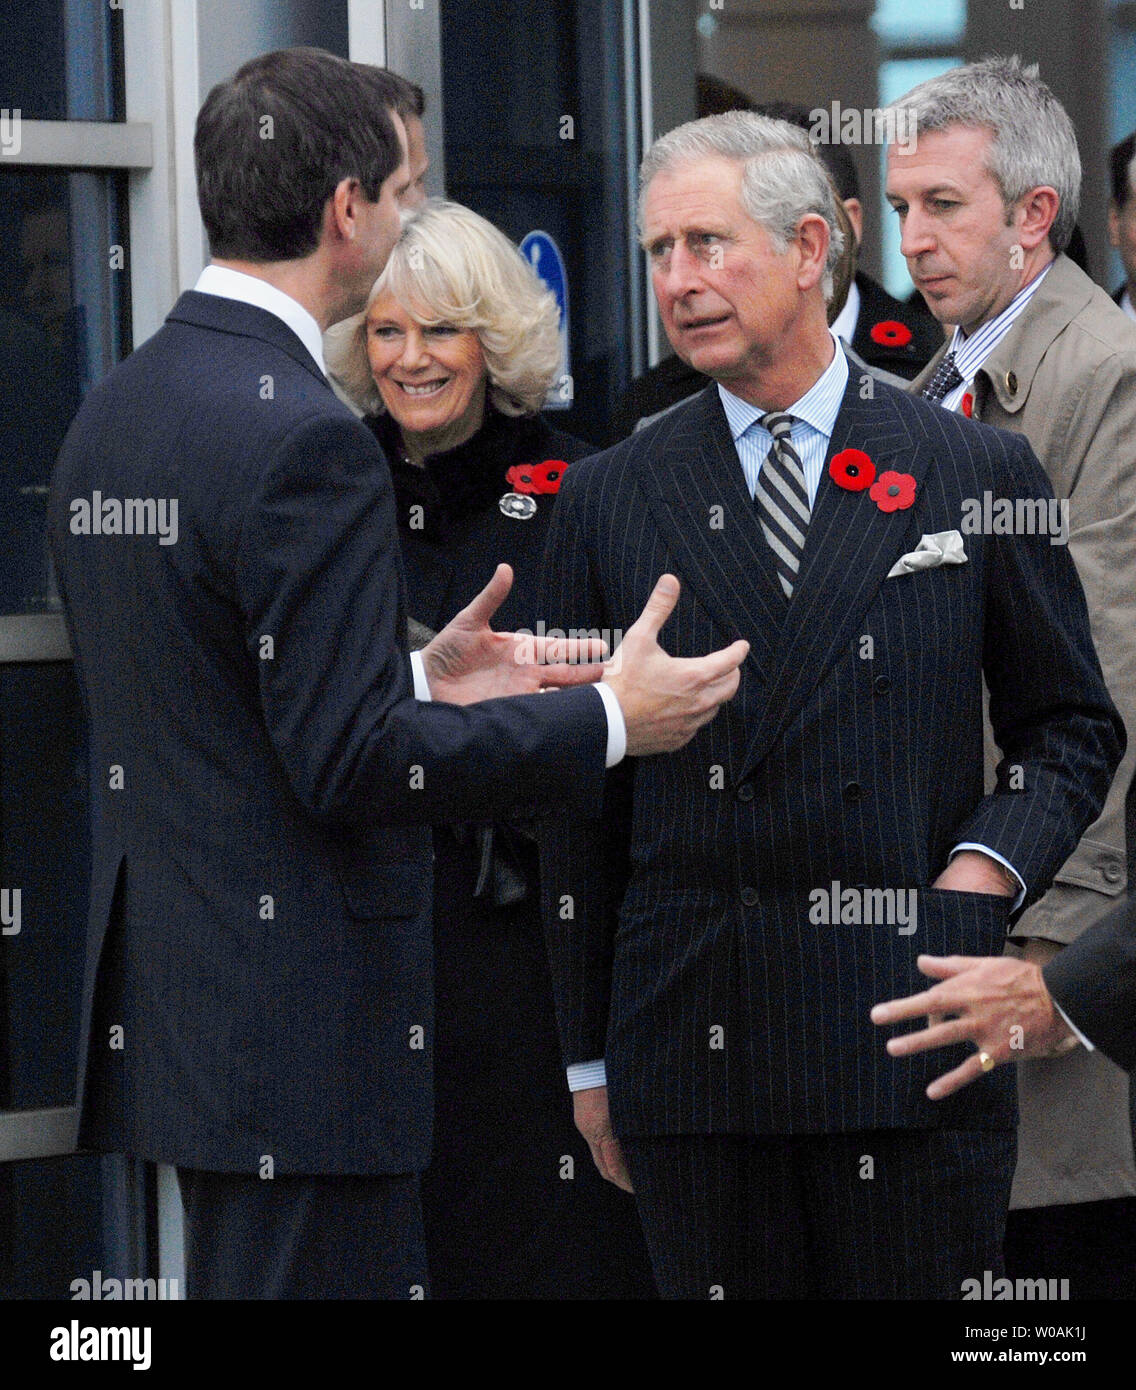 Britain's Prince Charles (R) and Ontario premier Dalton McGuinty chat as the Prince and his wife Camilla, Duchess of Cornwall (center), arrive at Pearson International Airport in Toronto, Canada on November 4, 2009.  The royal couple are on an 11-day tour of Canada.  UPI /Christine Chew Stock Photo